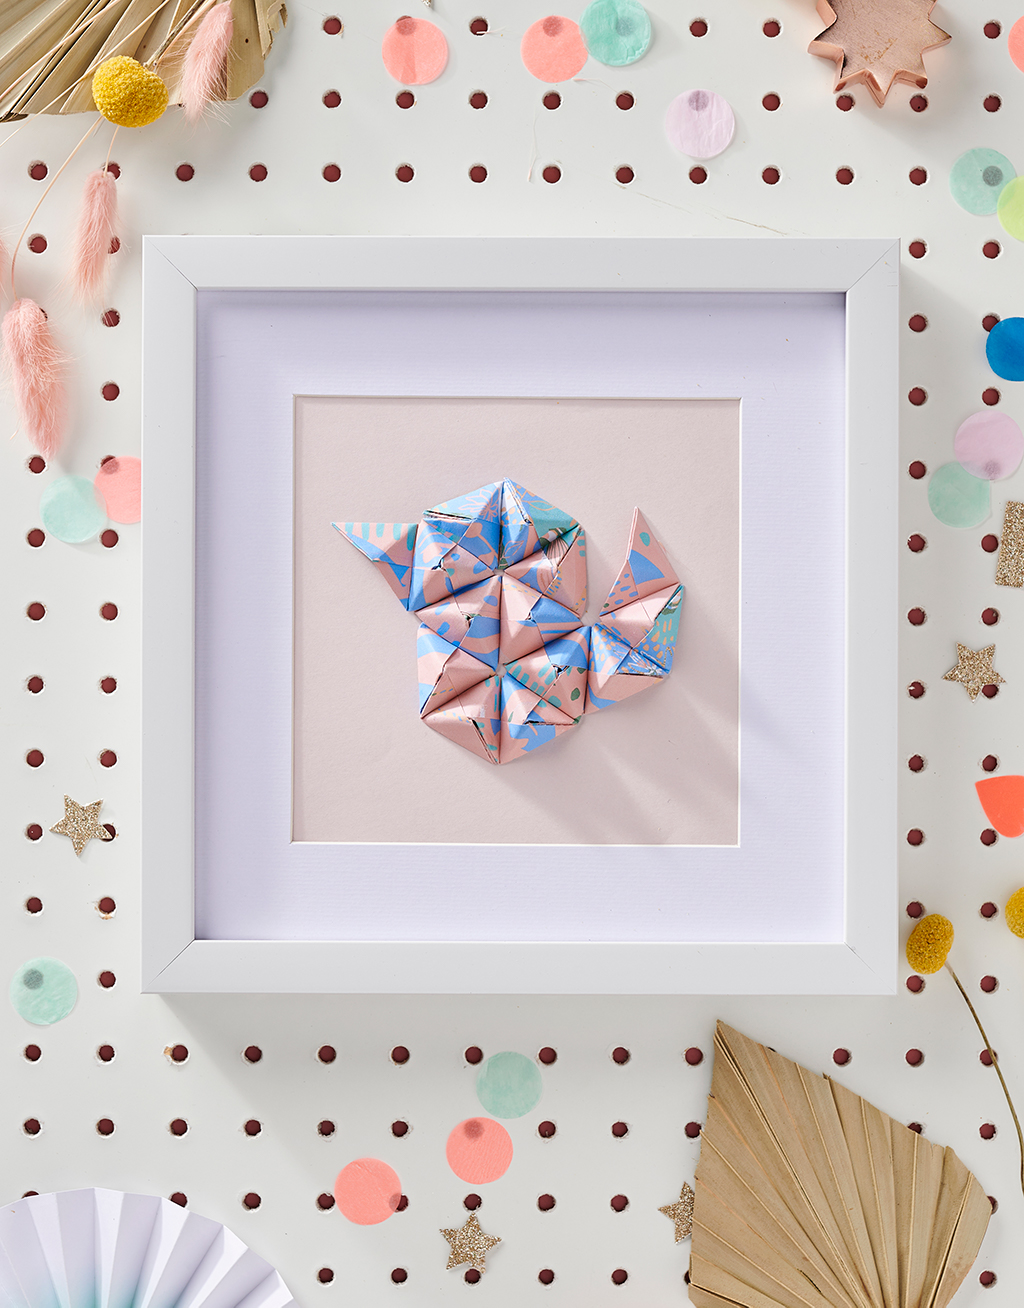 How to make origami wall art